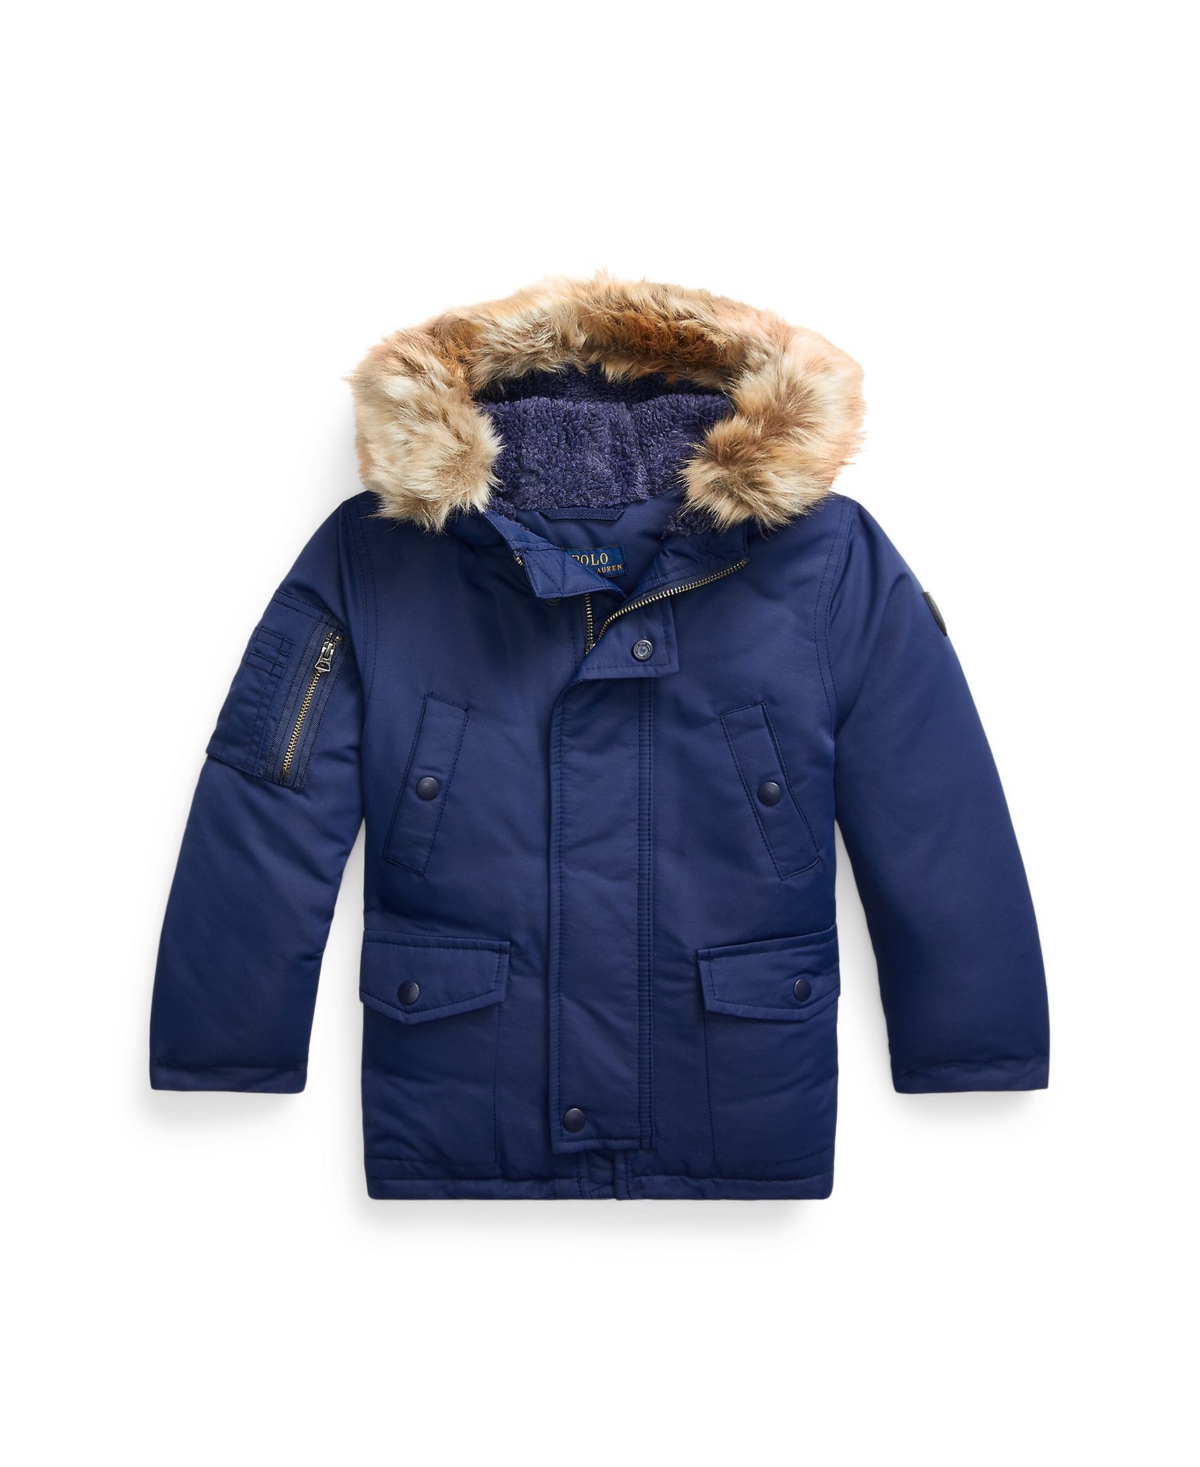 Polo Ralph Lauren Kids' Little And Toddler Boys Water-resistant Down Parka Long Sleeve Jacket In Newport Navy